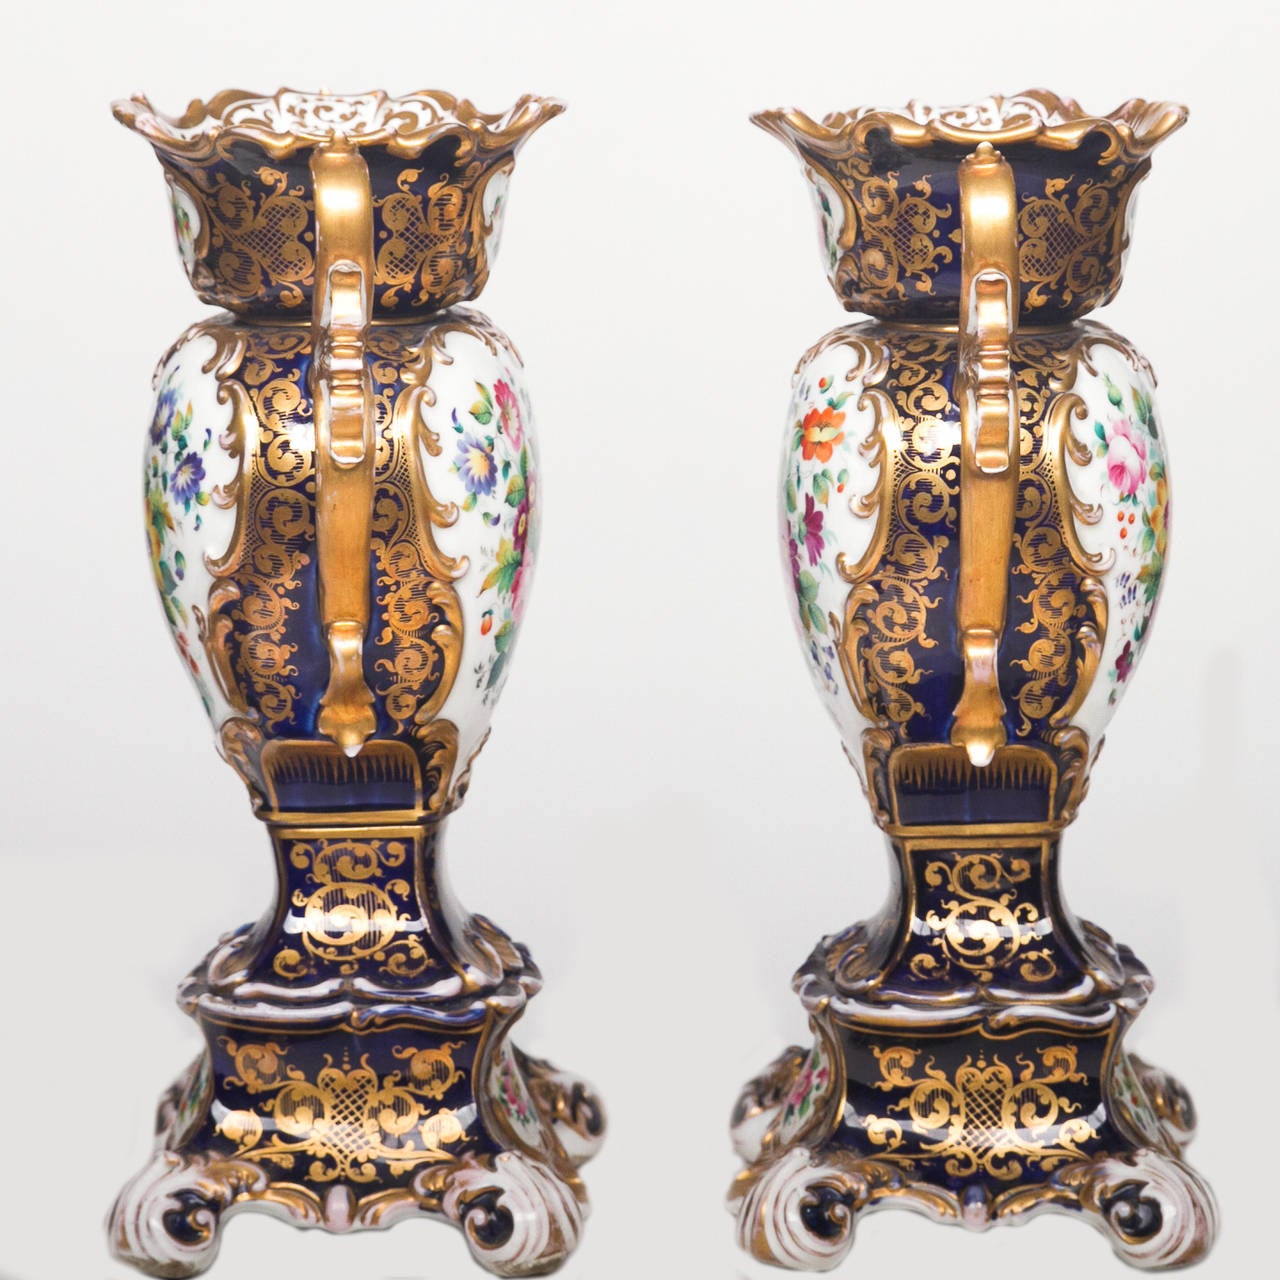 French Pair of Old Paris Porcelain Hand-Painted Urns